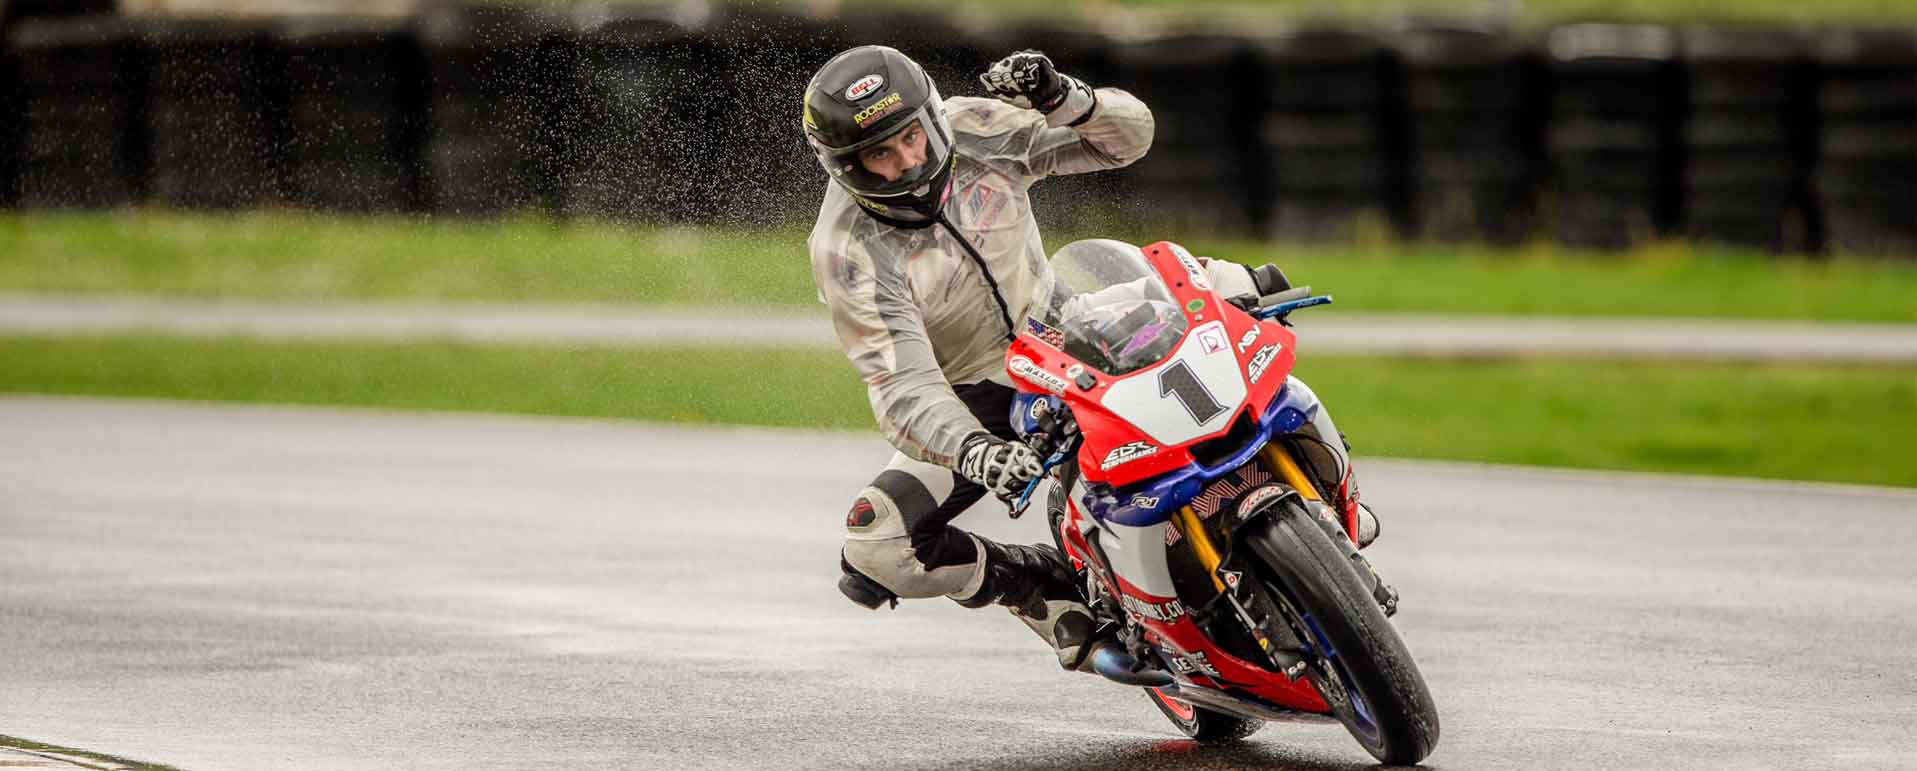 Andy after a win in wet contditions racing his R1 1000cc motorcycle at Portland International Raceway OMRRA round 1 series